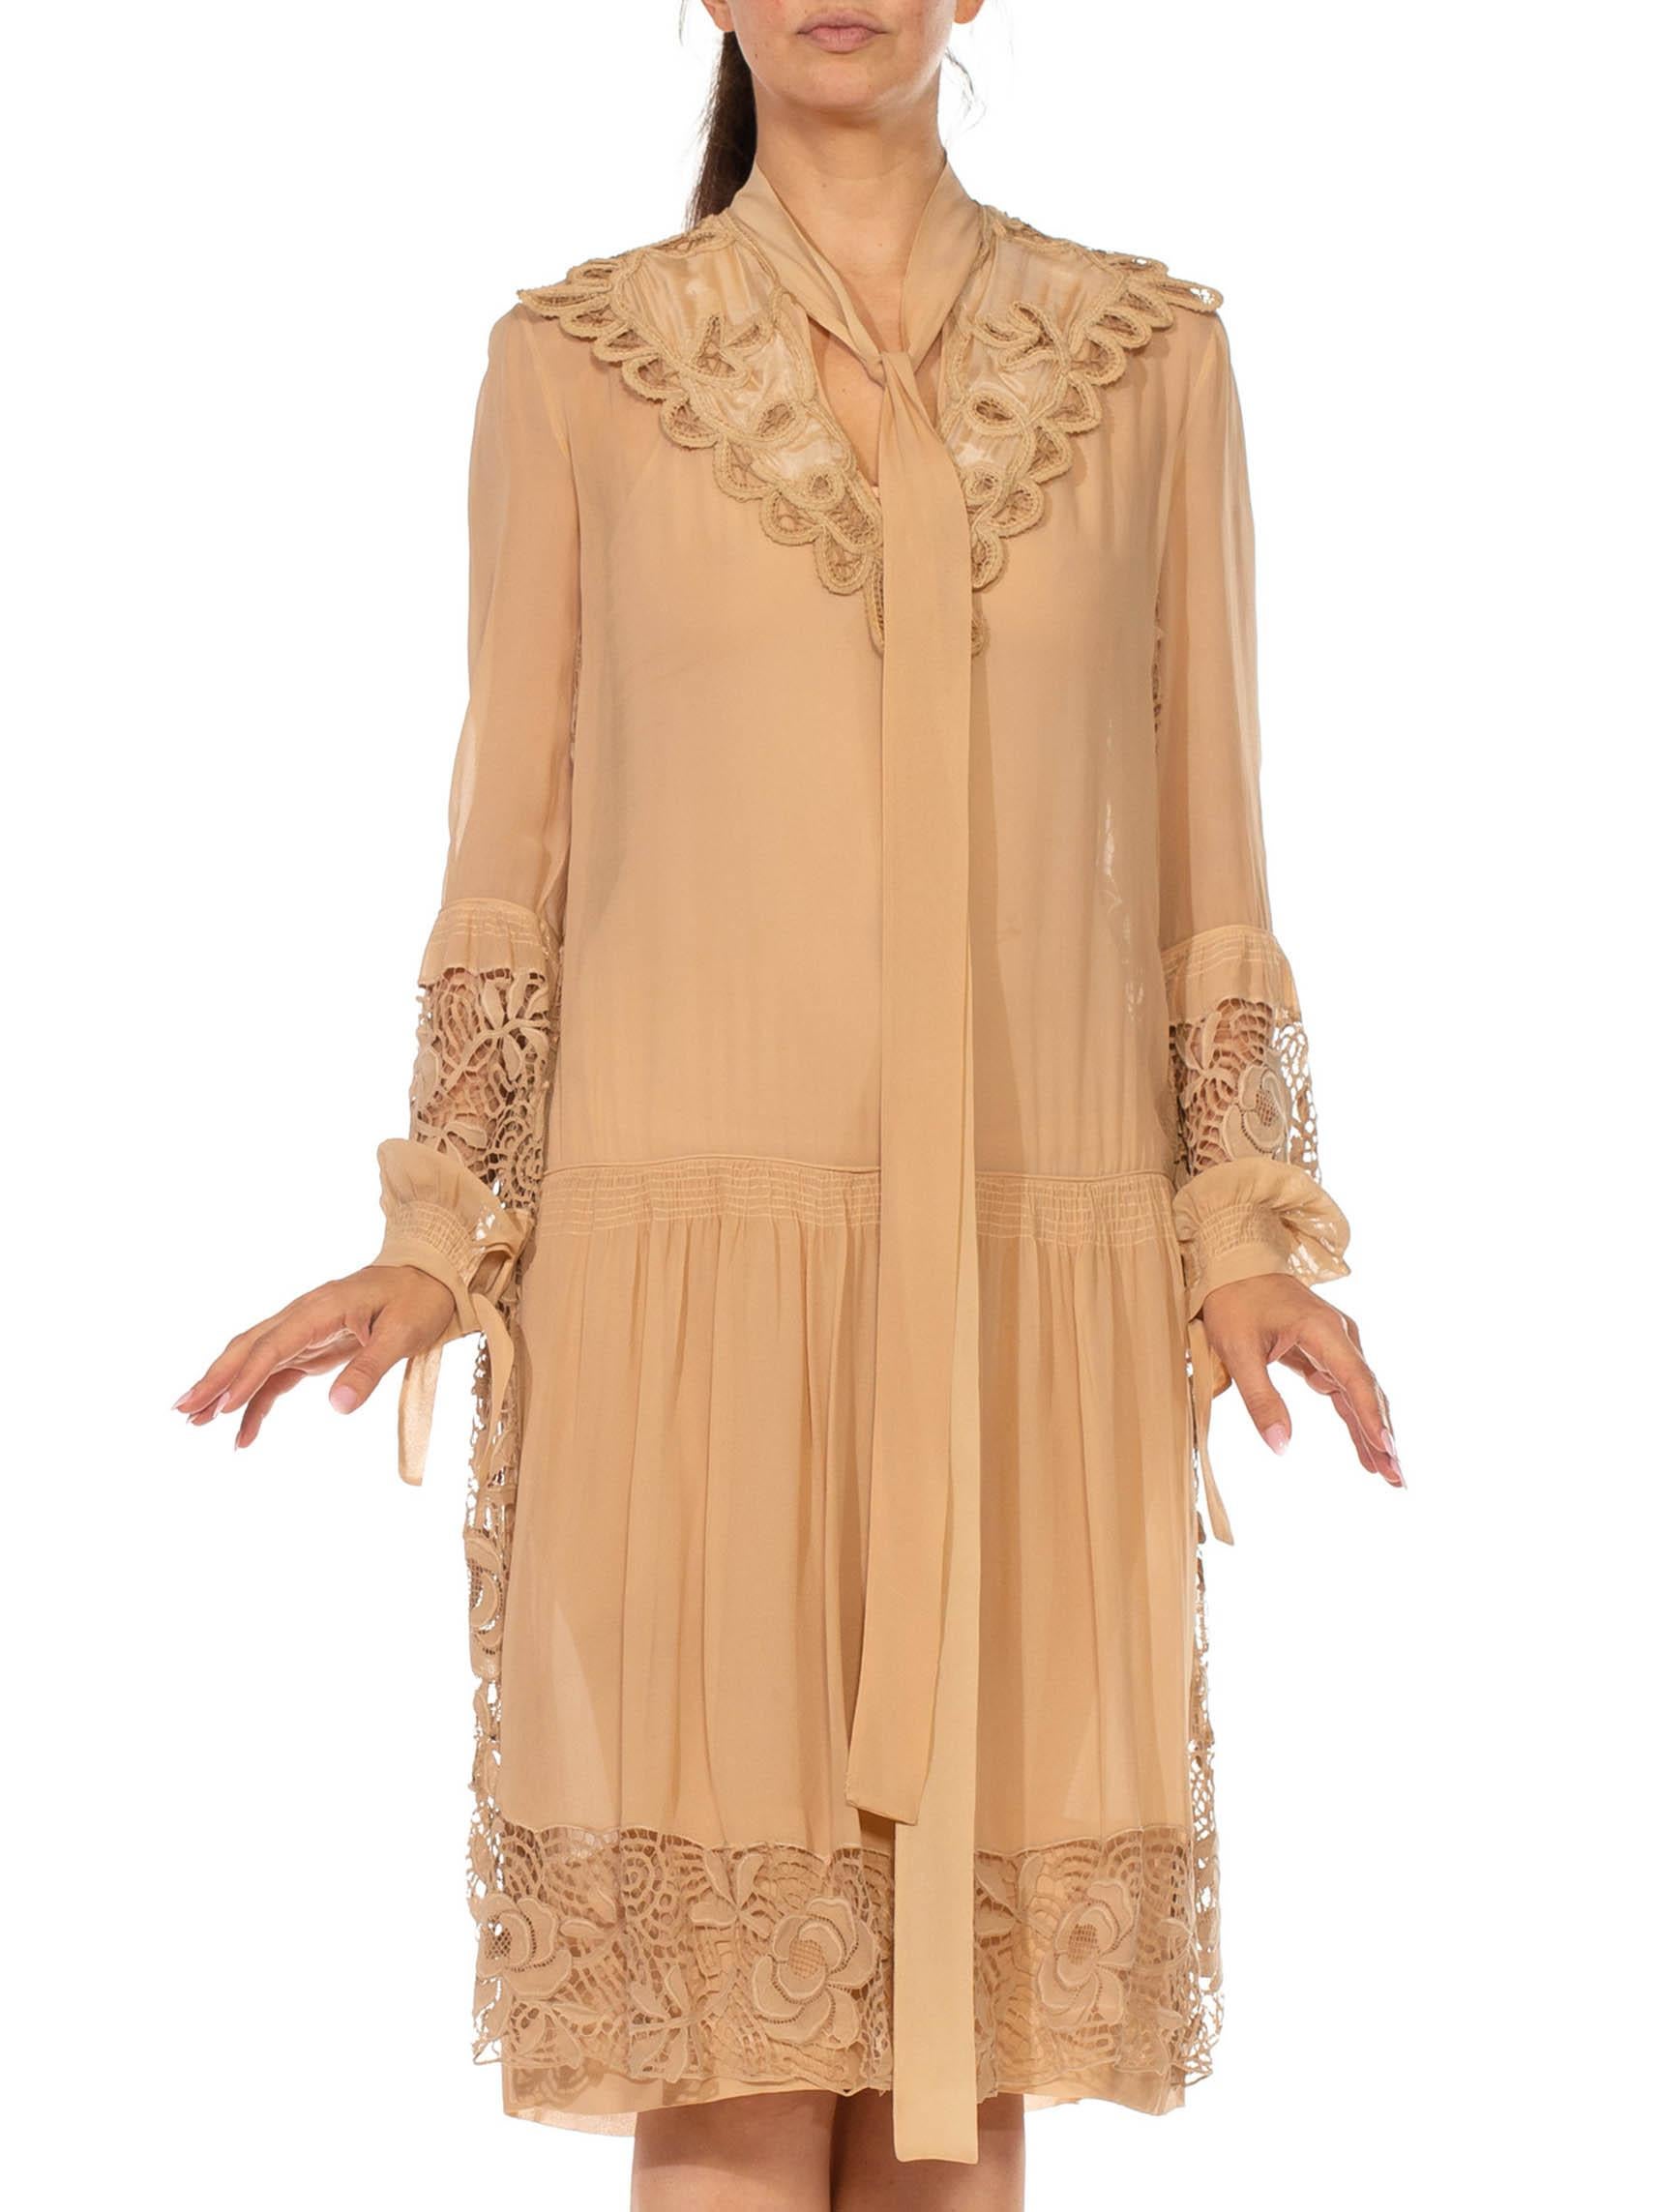 1920S Ecru Silk Chiffon & Lace Drop-Waist Flapper Era Day Dress In Excellent Condition For Sale In New York, NY